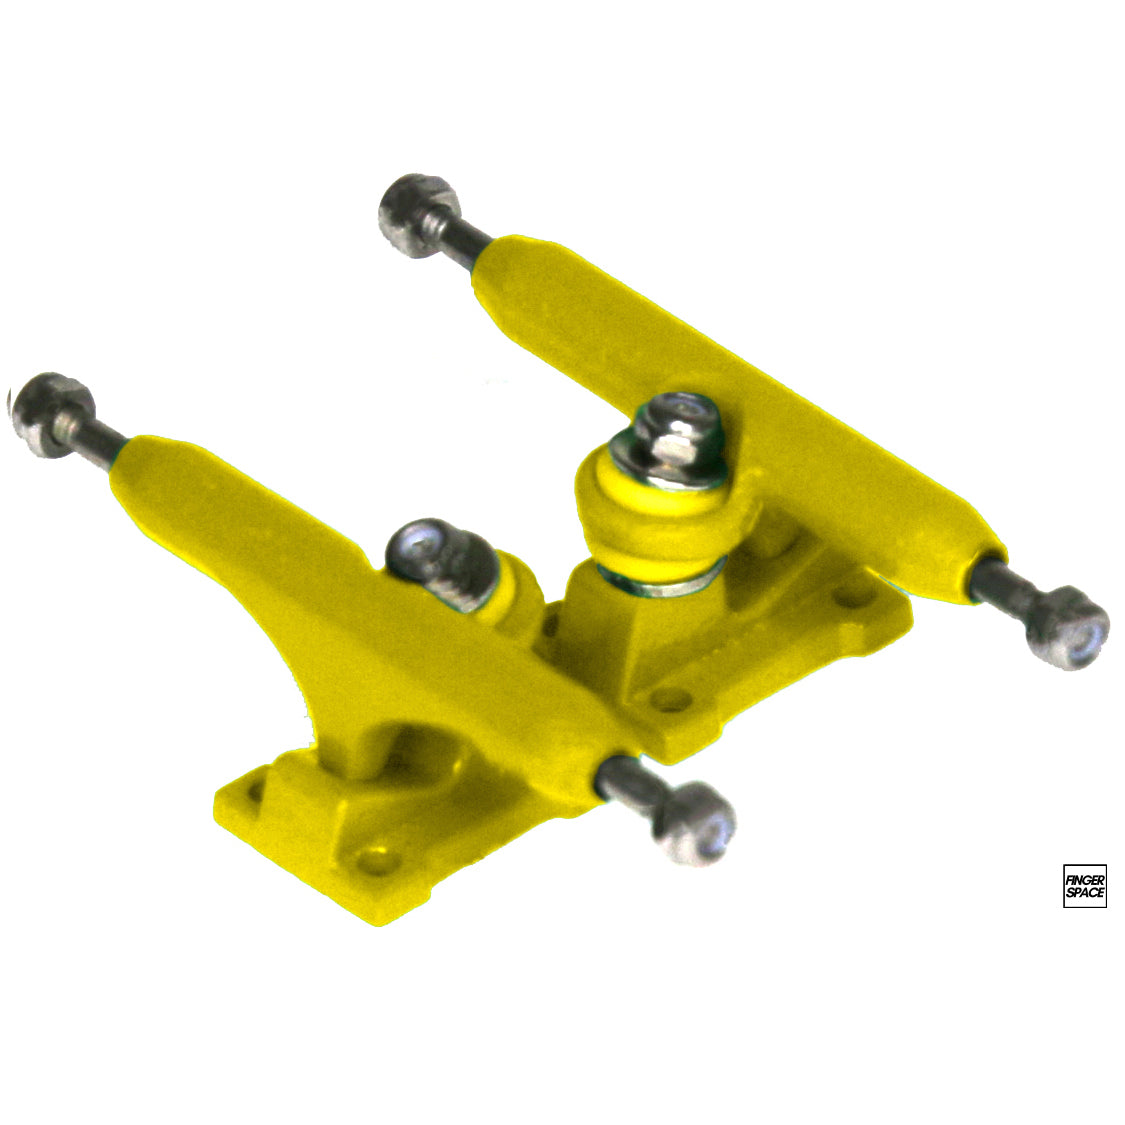 32mm Pro Space Trucks - "Tuscan Yellow" Colorway